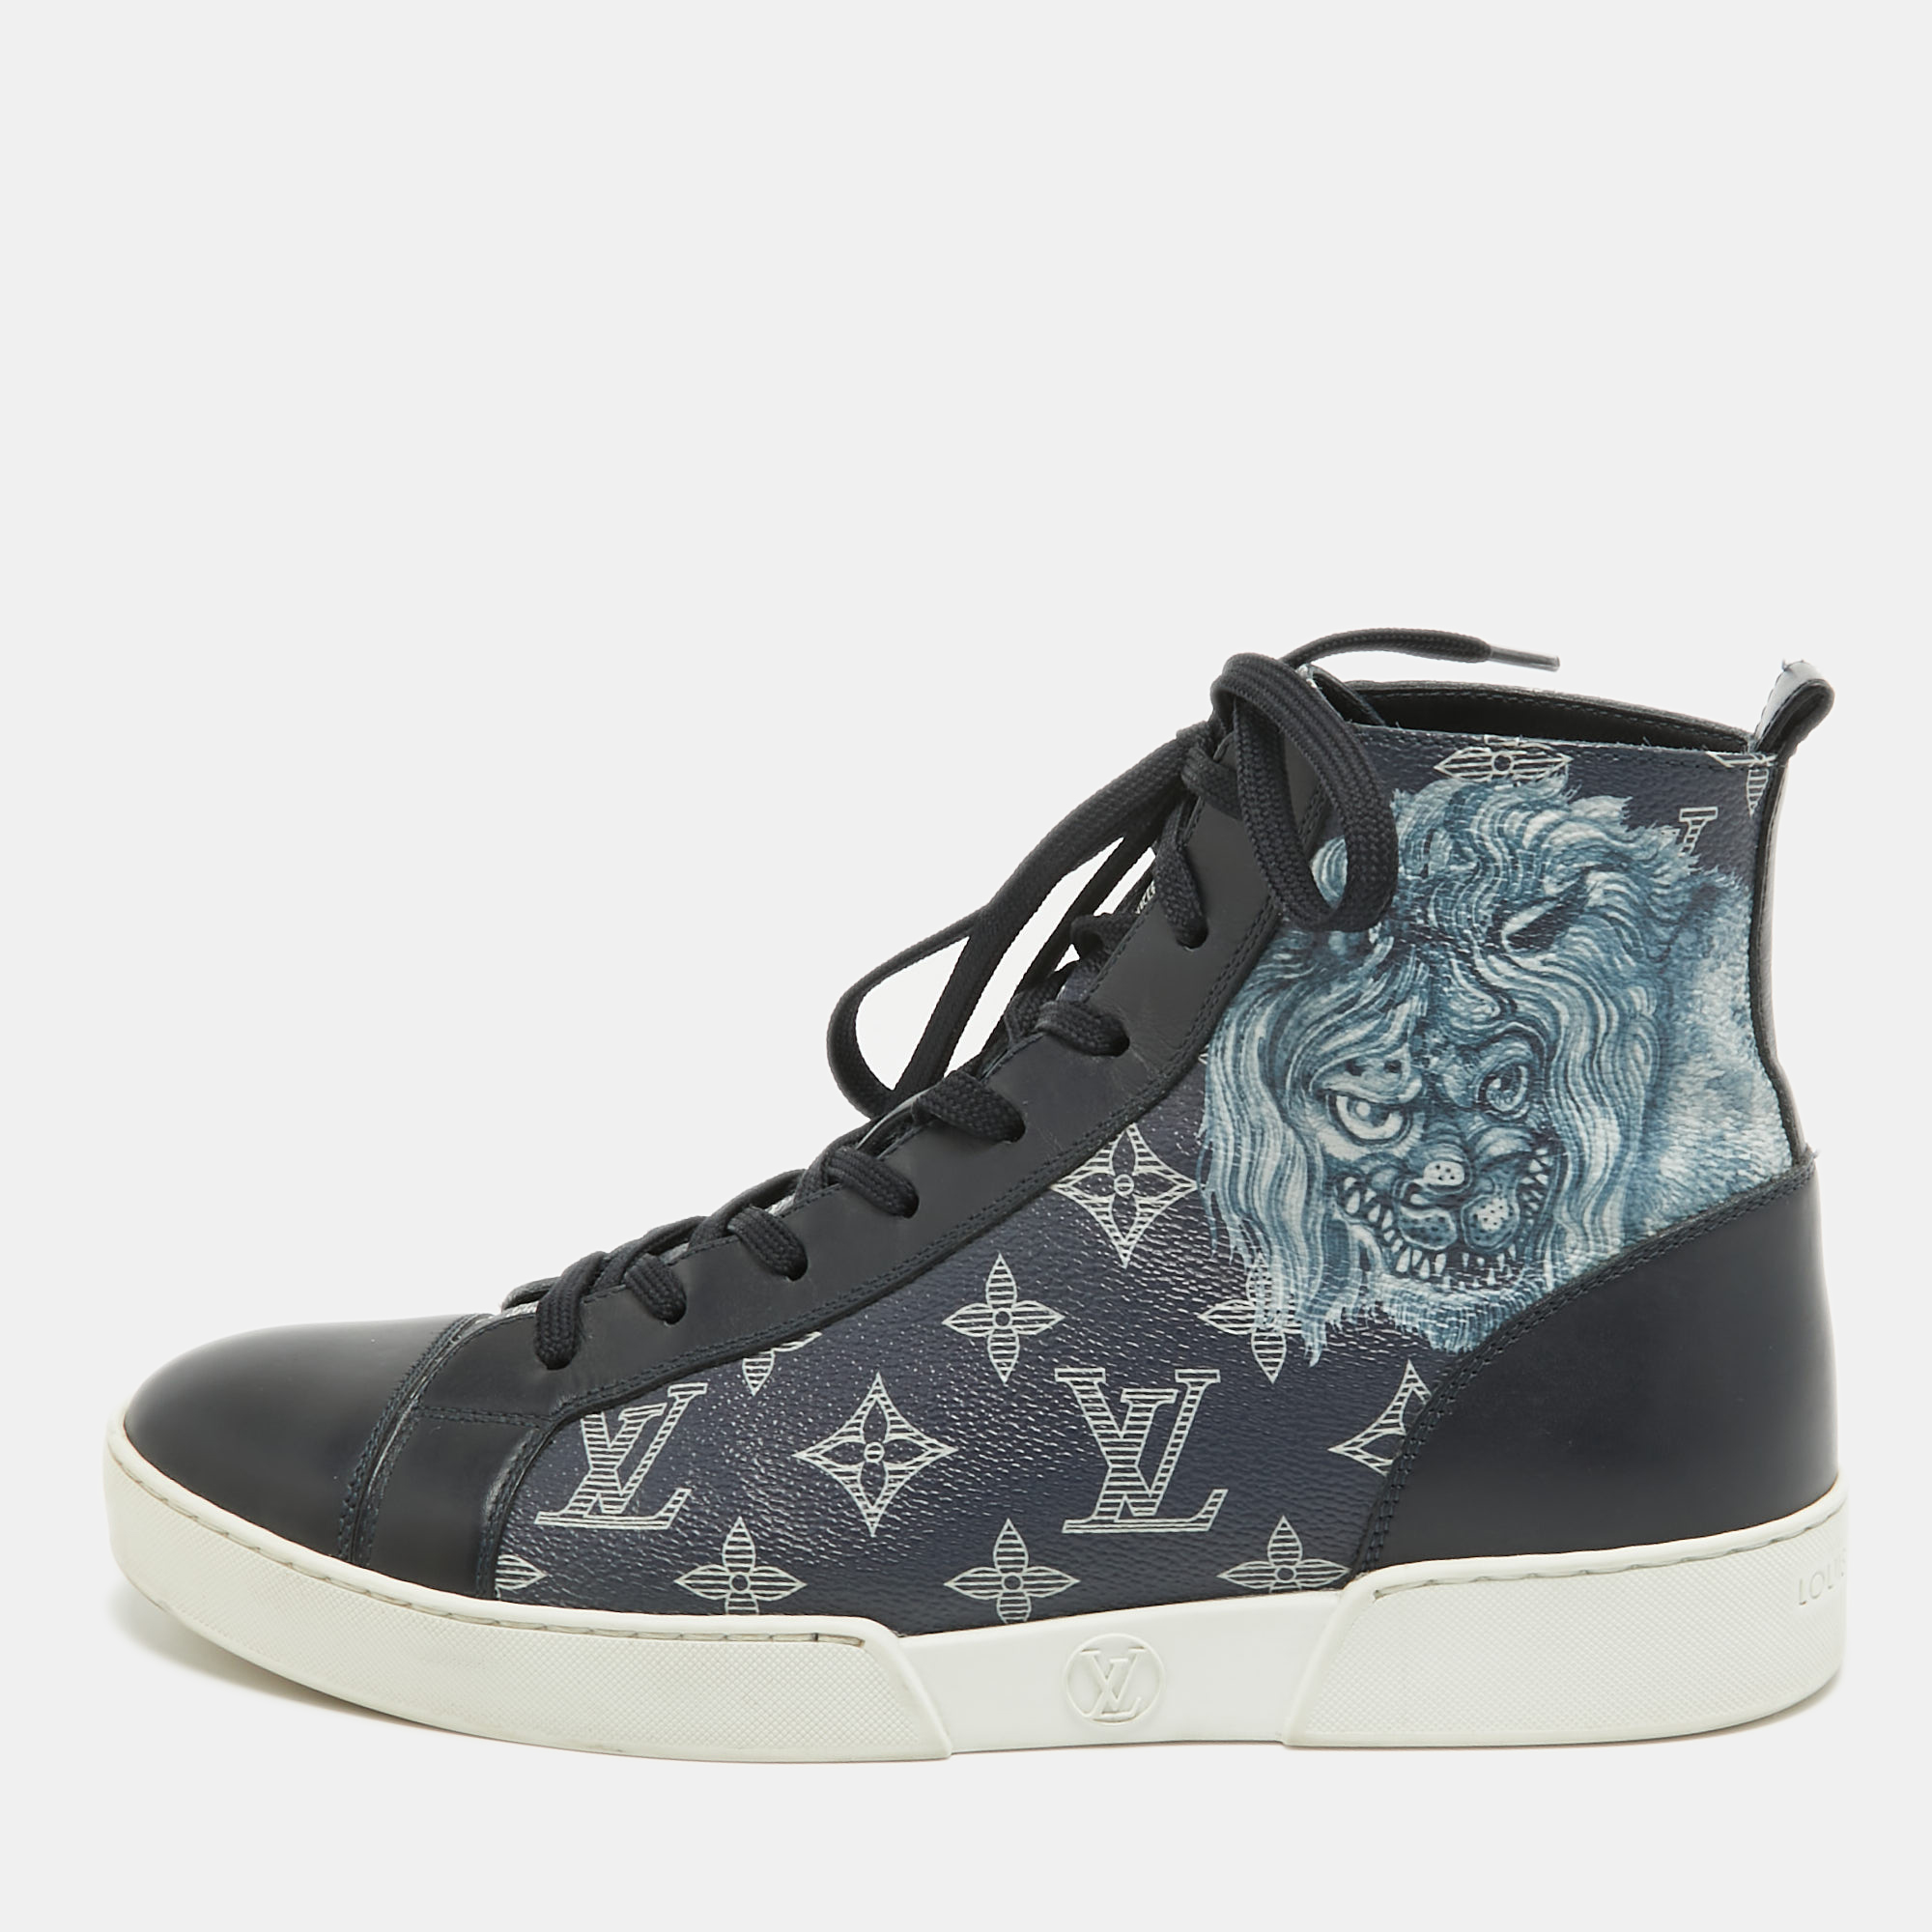 Comfort and high fashion are brought together in these LV sneakers. They have been crafted from high quality materials into a sturdy design. Add them to your closet and walk the streets in style